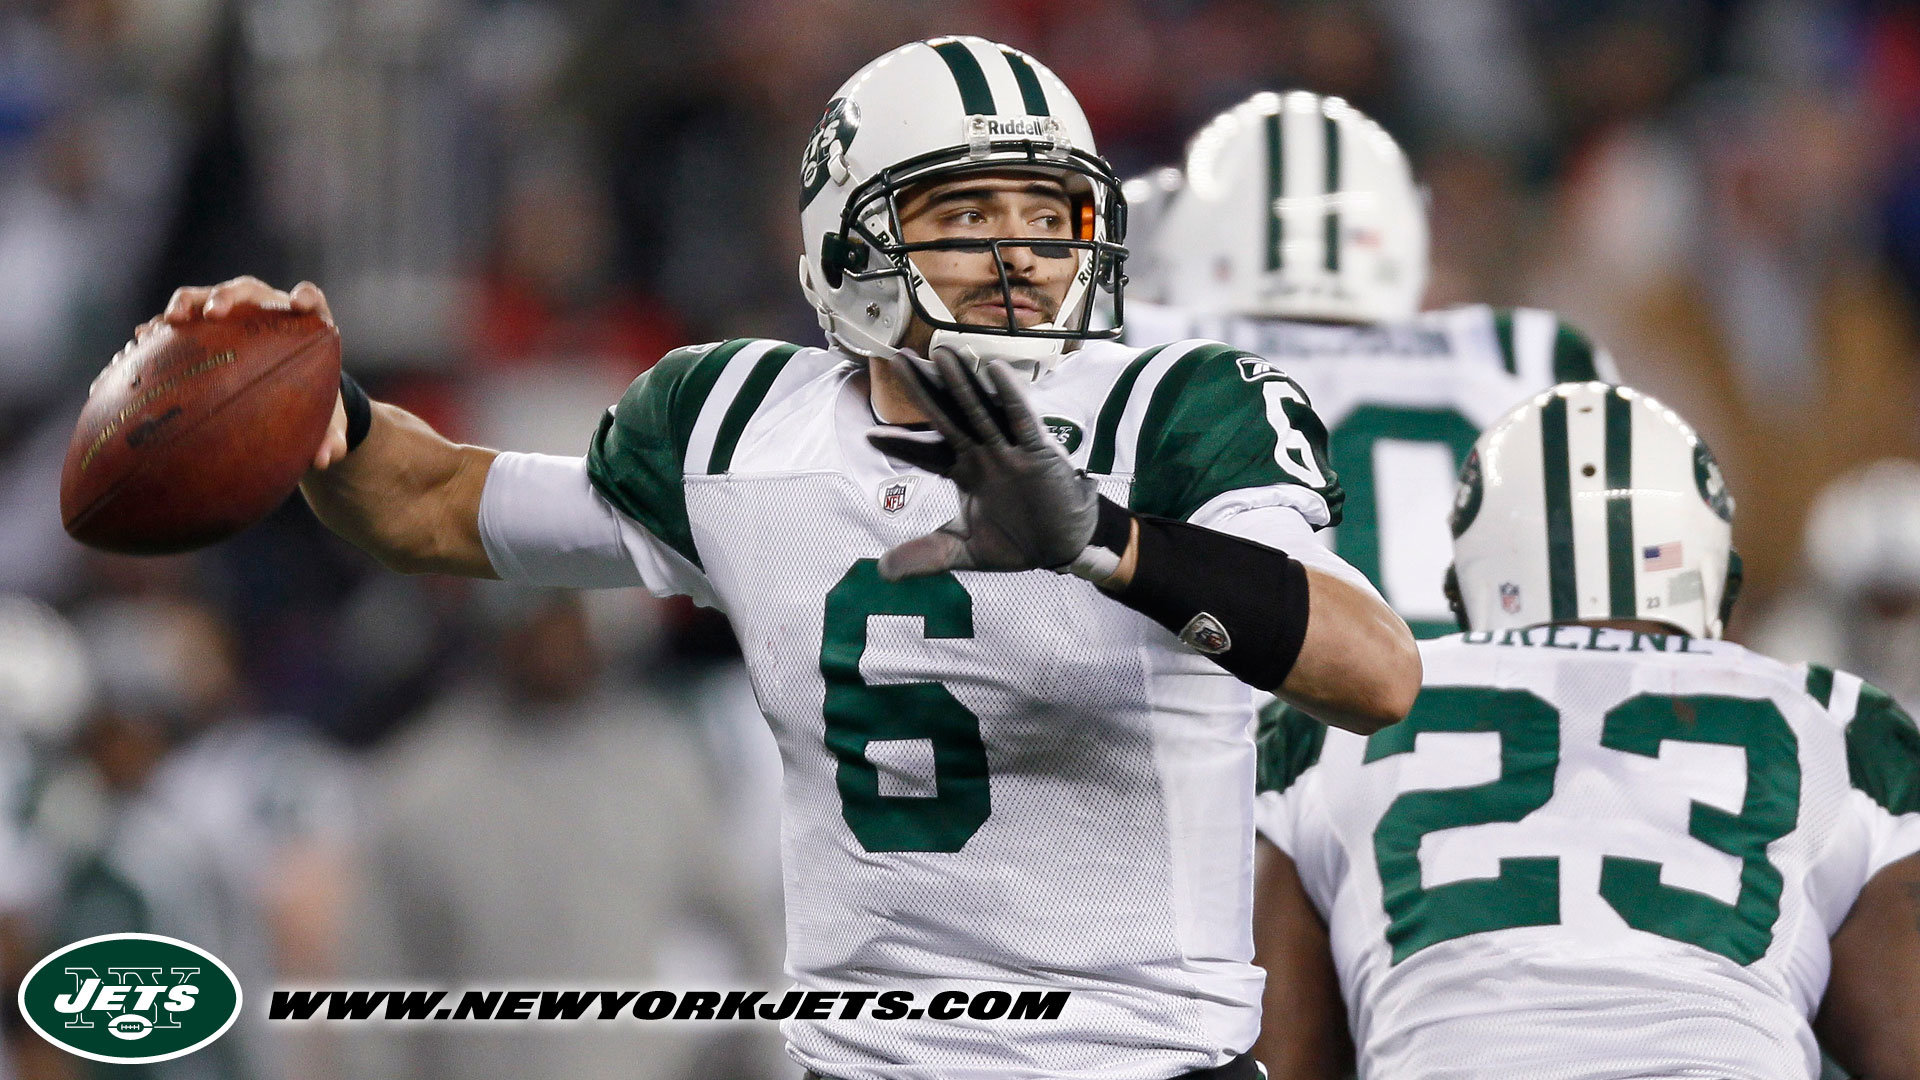 Best New York Jets wallpaper ID:278440 for High Resolution hd 1080p computer